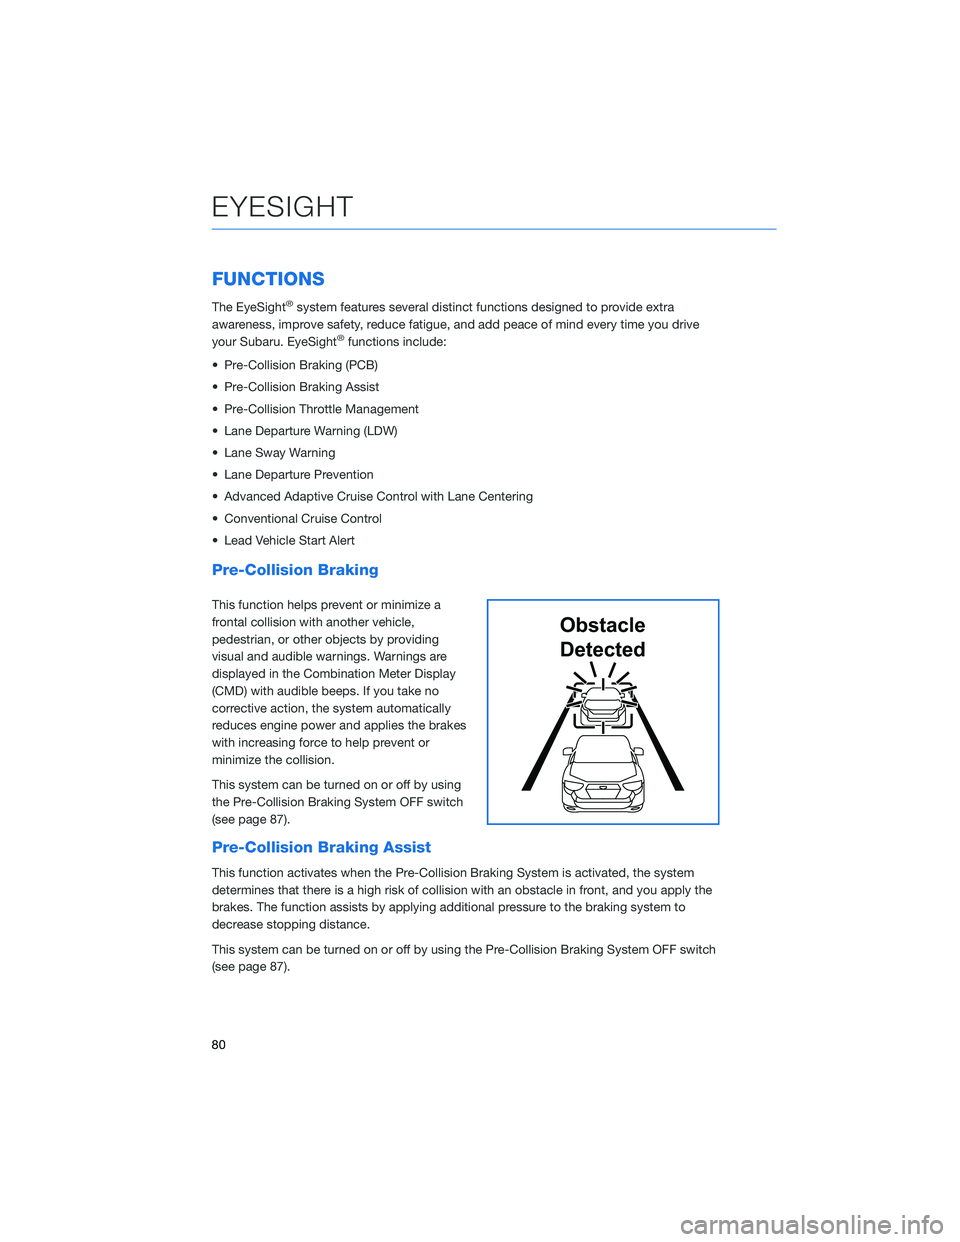 SUBARU CROSSTREK 2022  Getting Started Guide FUNCTIONS
The EyeSight®system features several distinct functions designed to provide extra
awareness, improve safety, reduce fatigue, and add peace of mind every time you drive
your Subaru. EyeSight